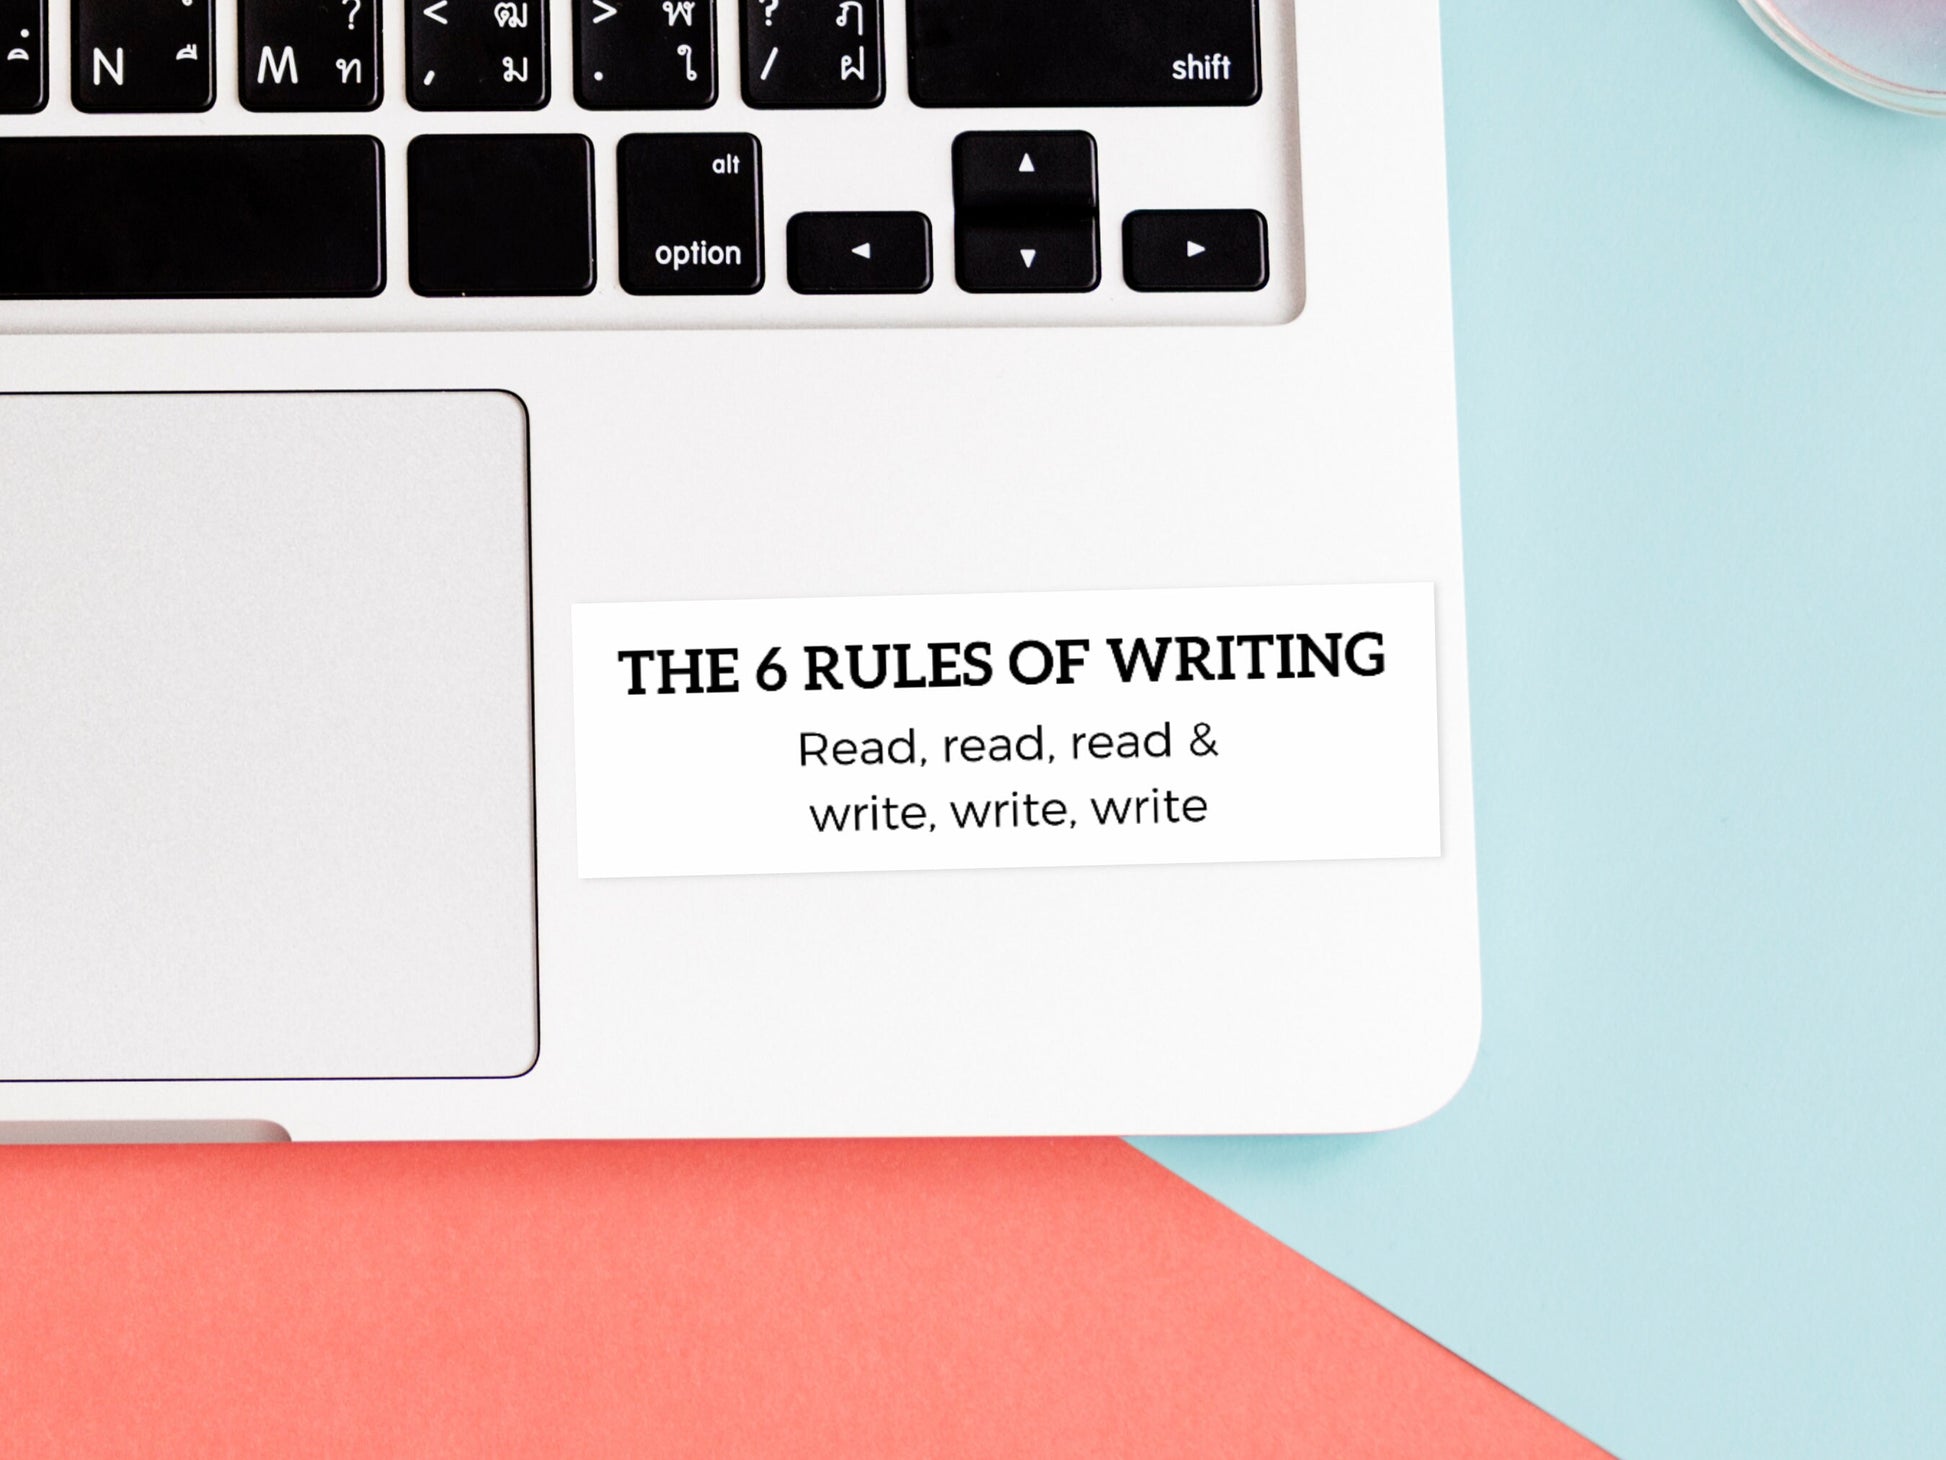 The 6 Rules of Writing Sticker | Laptop Sticker | Writer Gifts | Writing Motivation